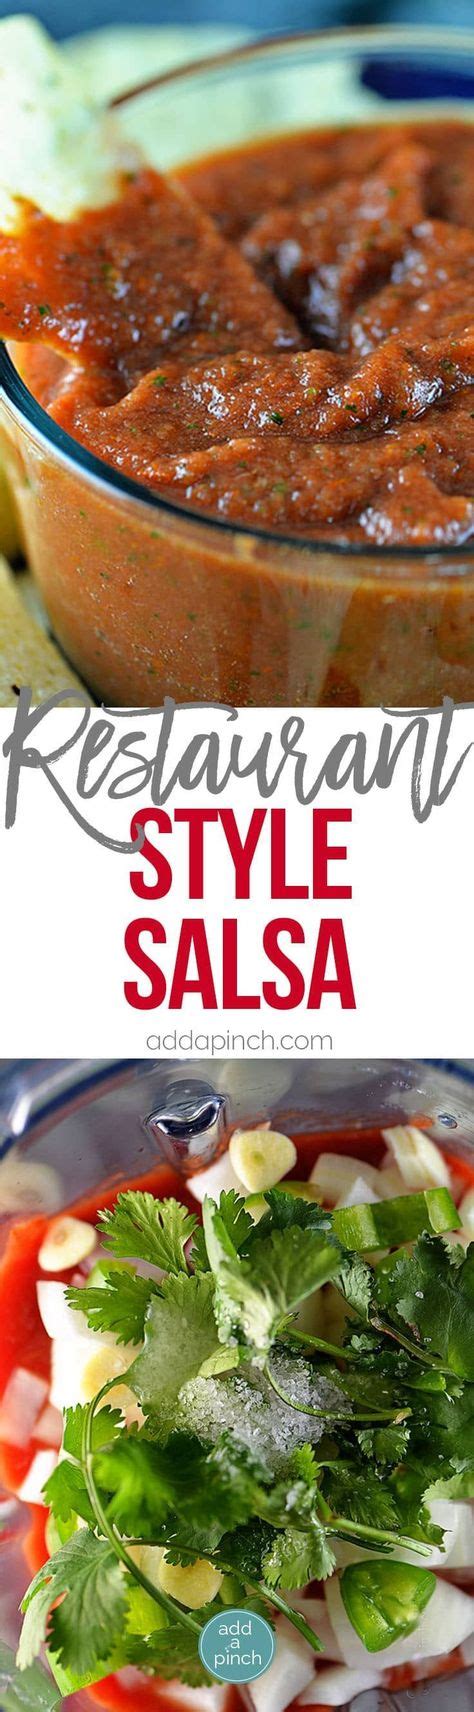 This salsa is bright, fresh and perfect for parties! Easy Restaurant Style Salsa Recipe - This salsa recipe is ...